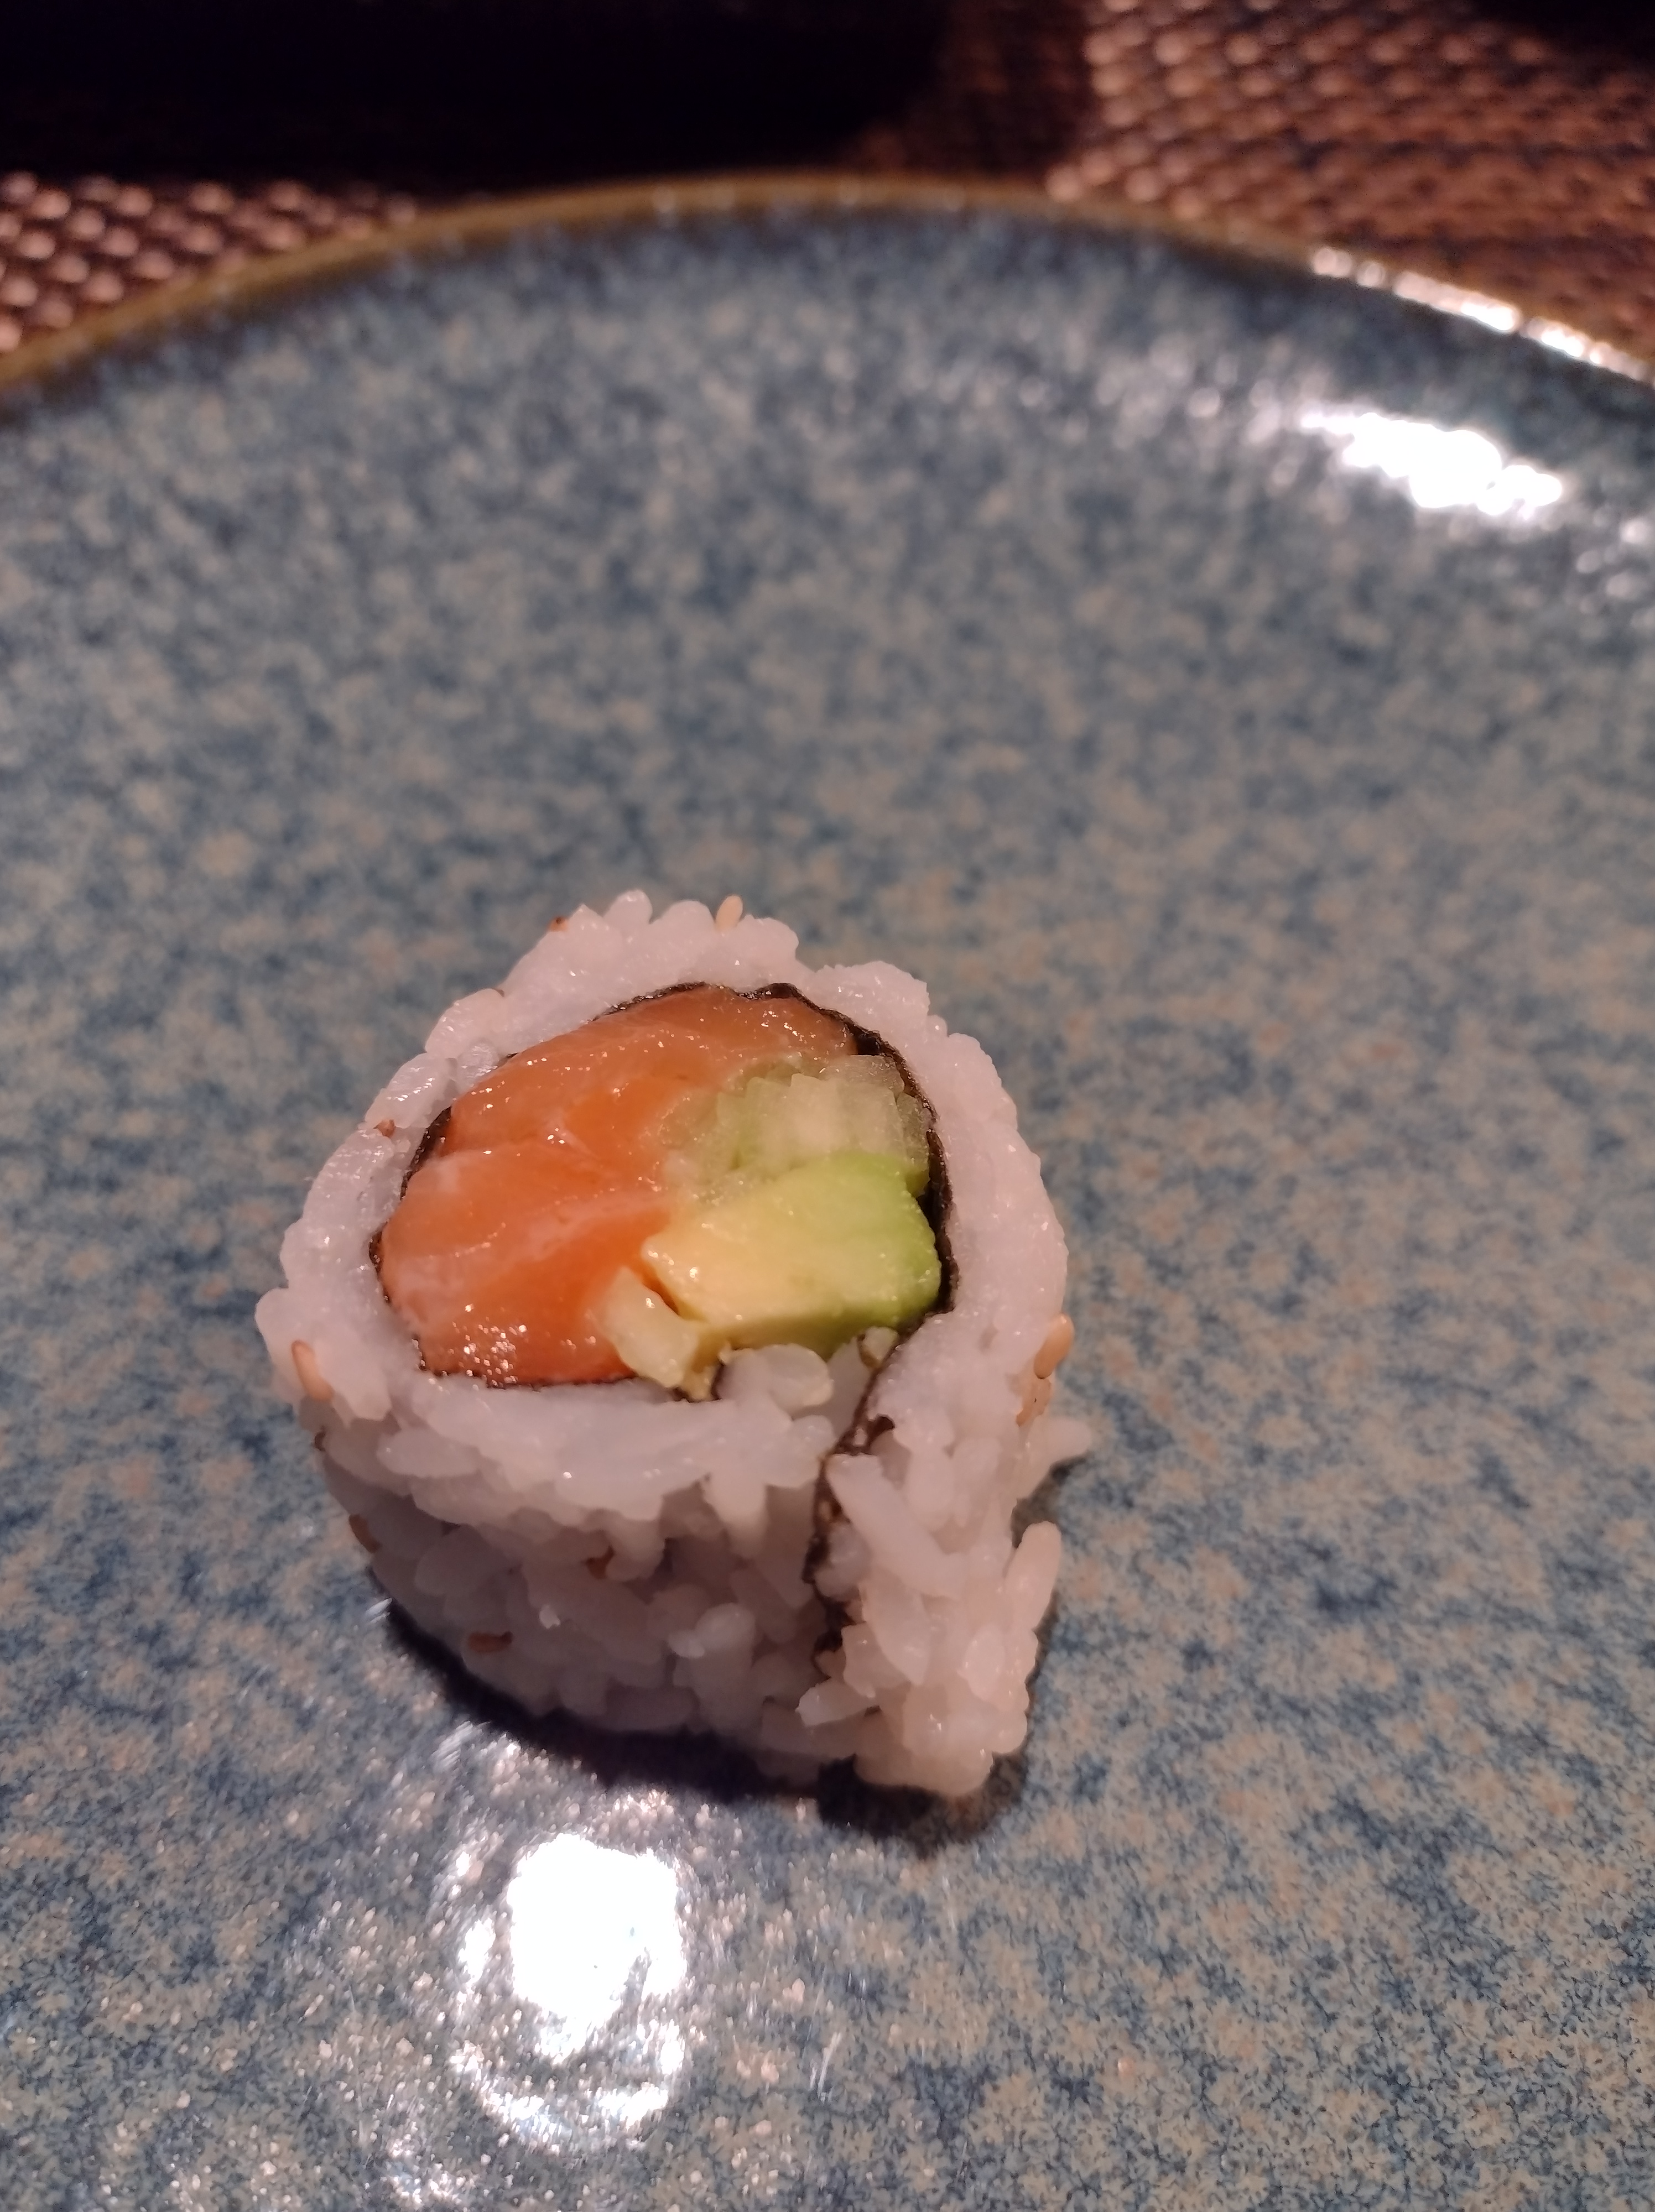 One piece of Alaska roll sits on a blue plate. Photo by Melkior Ornik.